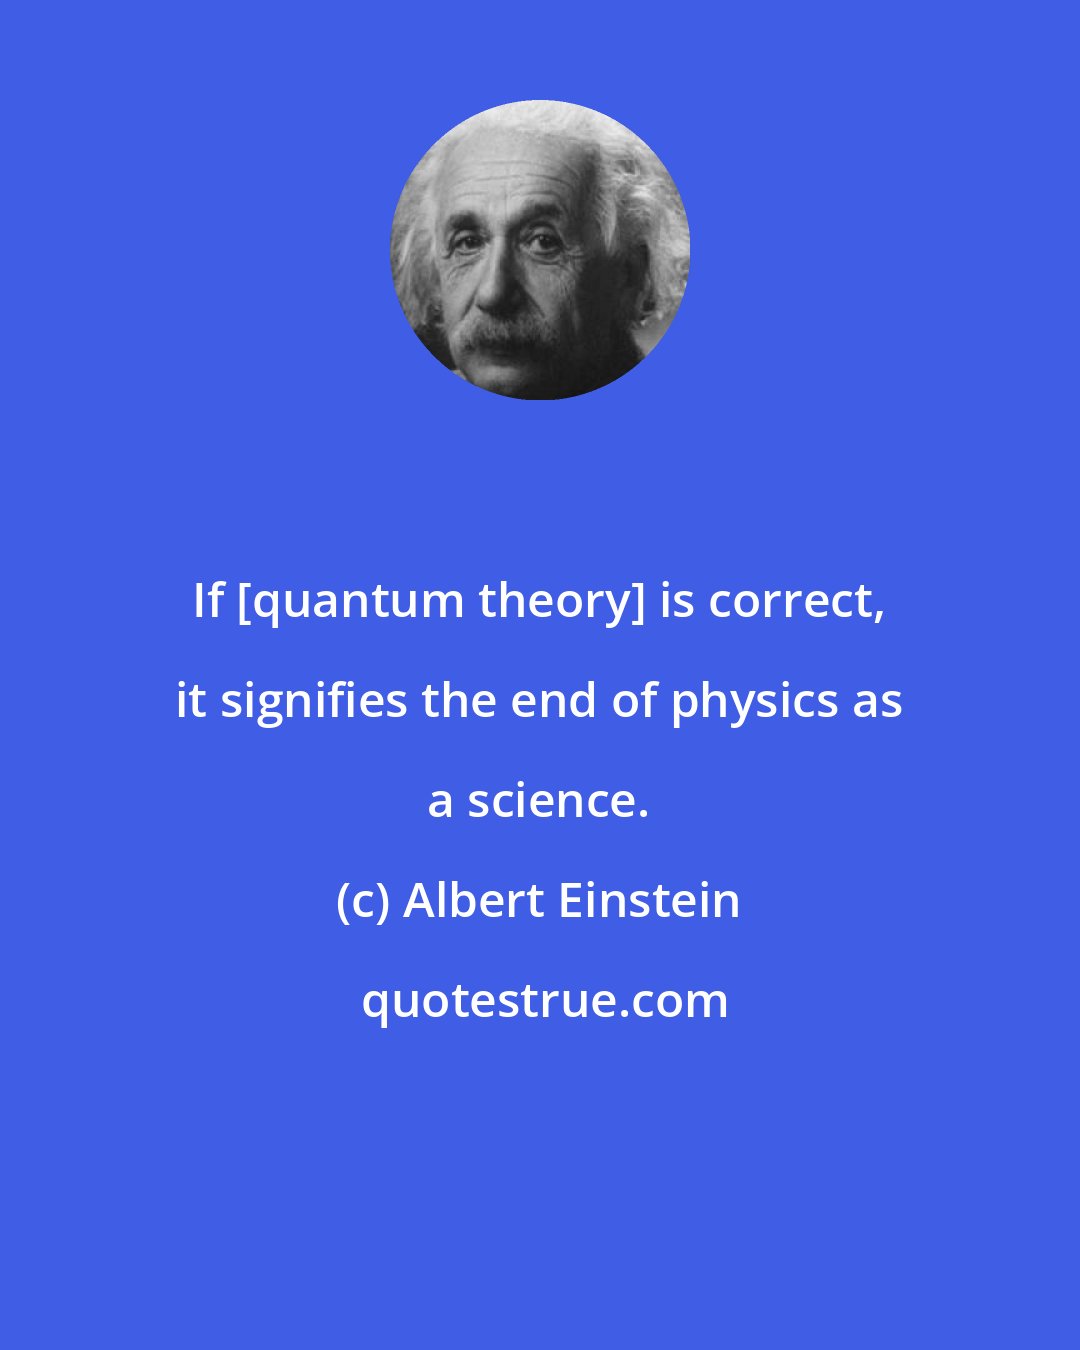 Albert Einstein: If [quantum theory] is correct, it signifies the end of physics as a science.